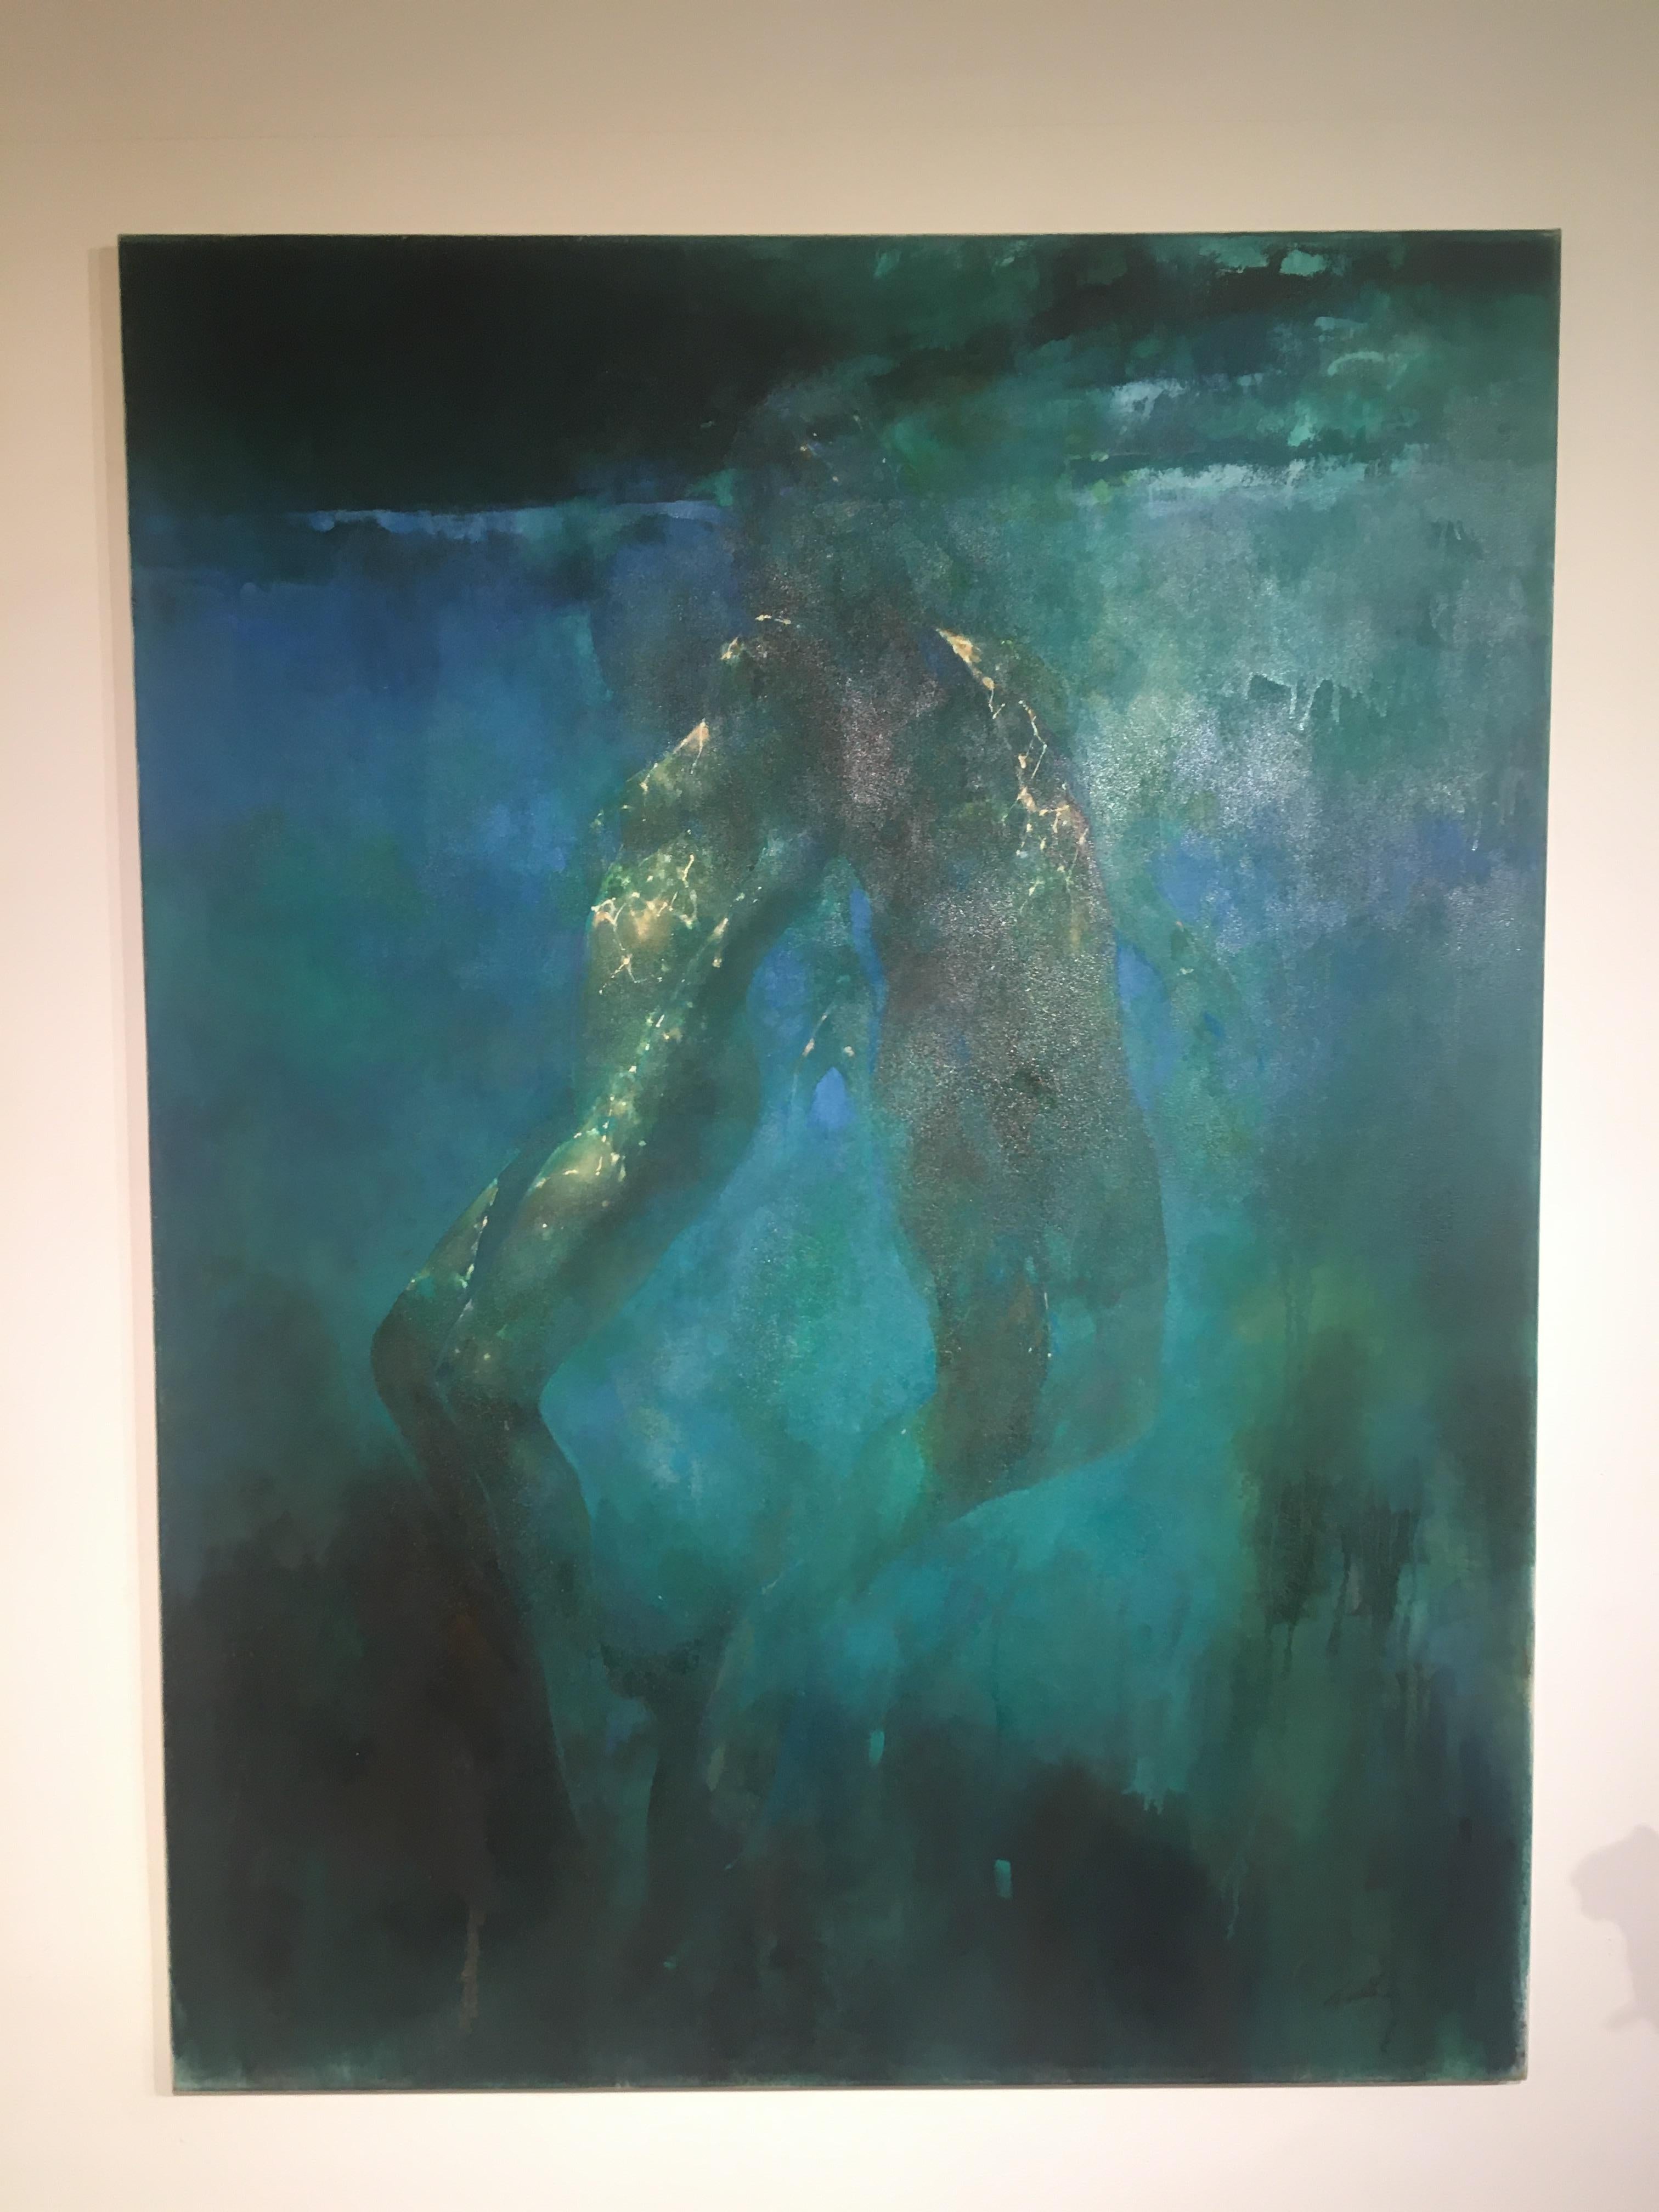 Silent Blue - blue and green underwater figurative painting oil on canvas - Painting by Bill Bate